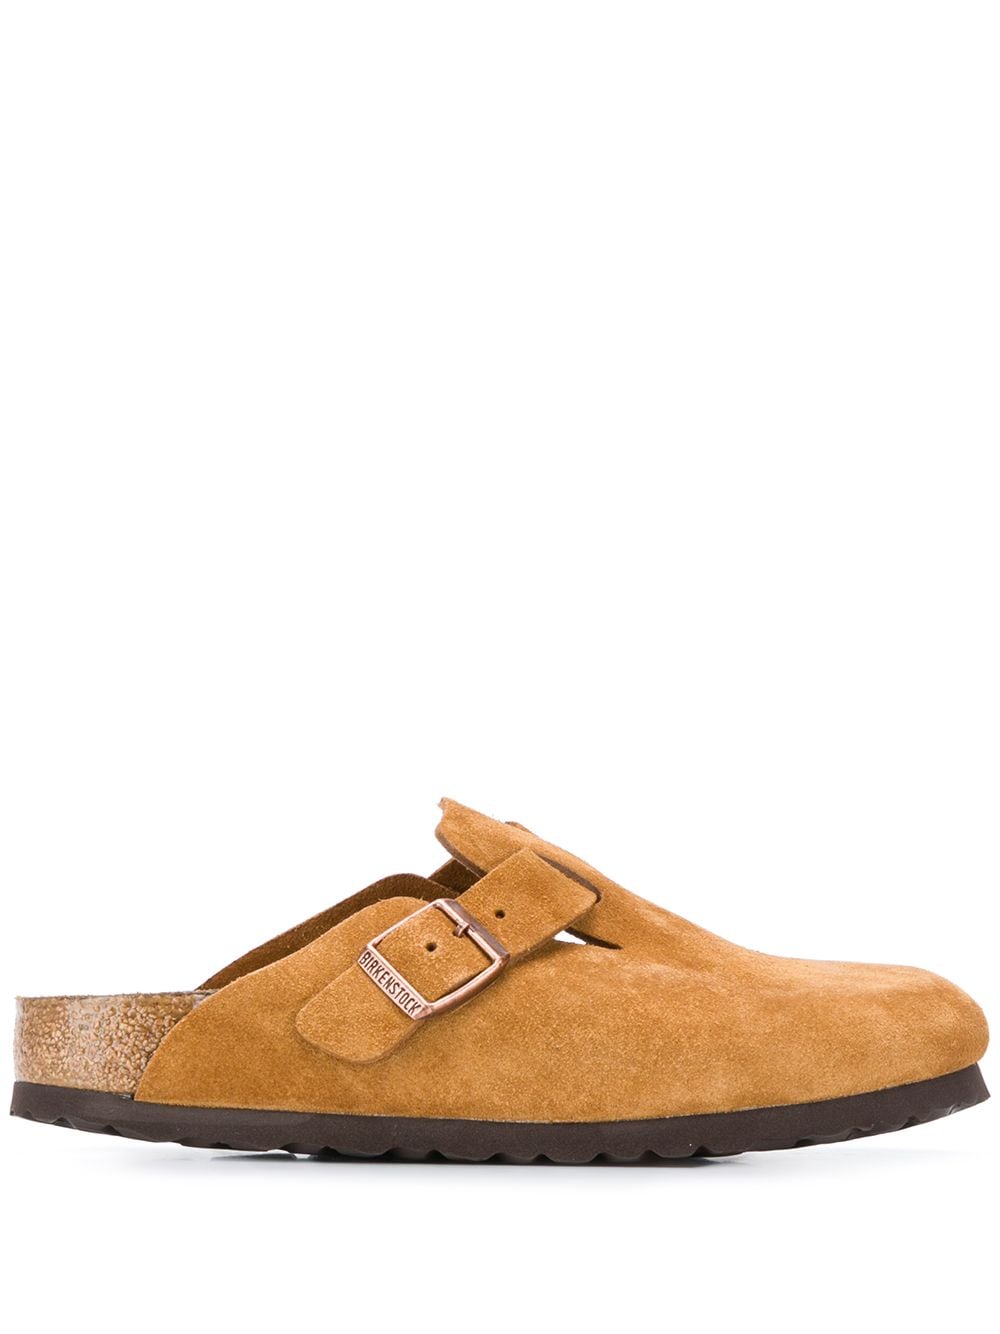 BIRKENSTOCK Boston Soft Footbed Suede Leather Slippers